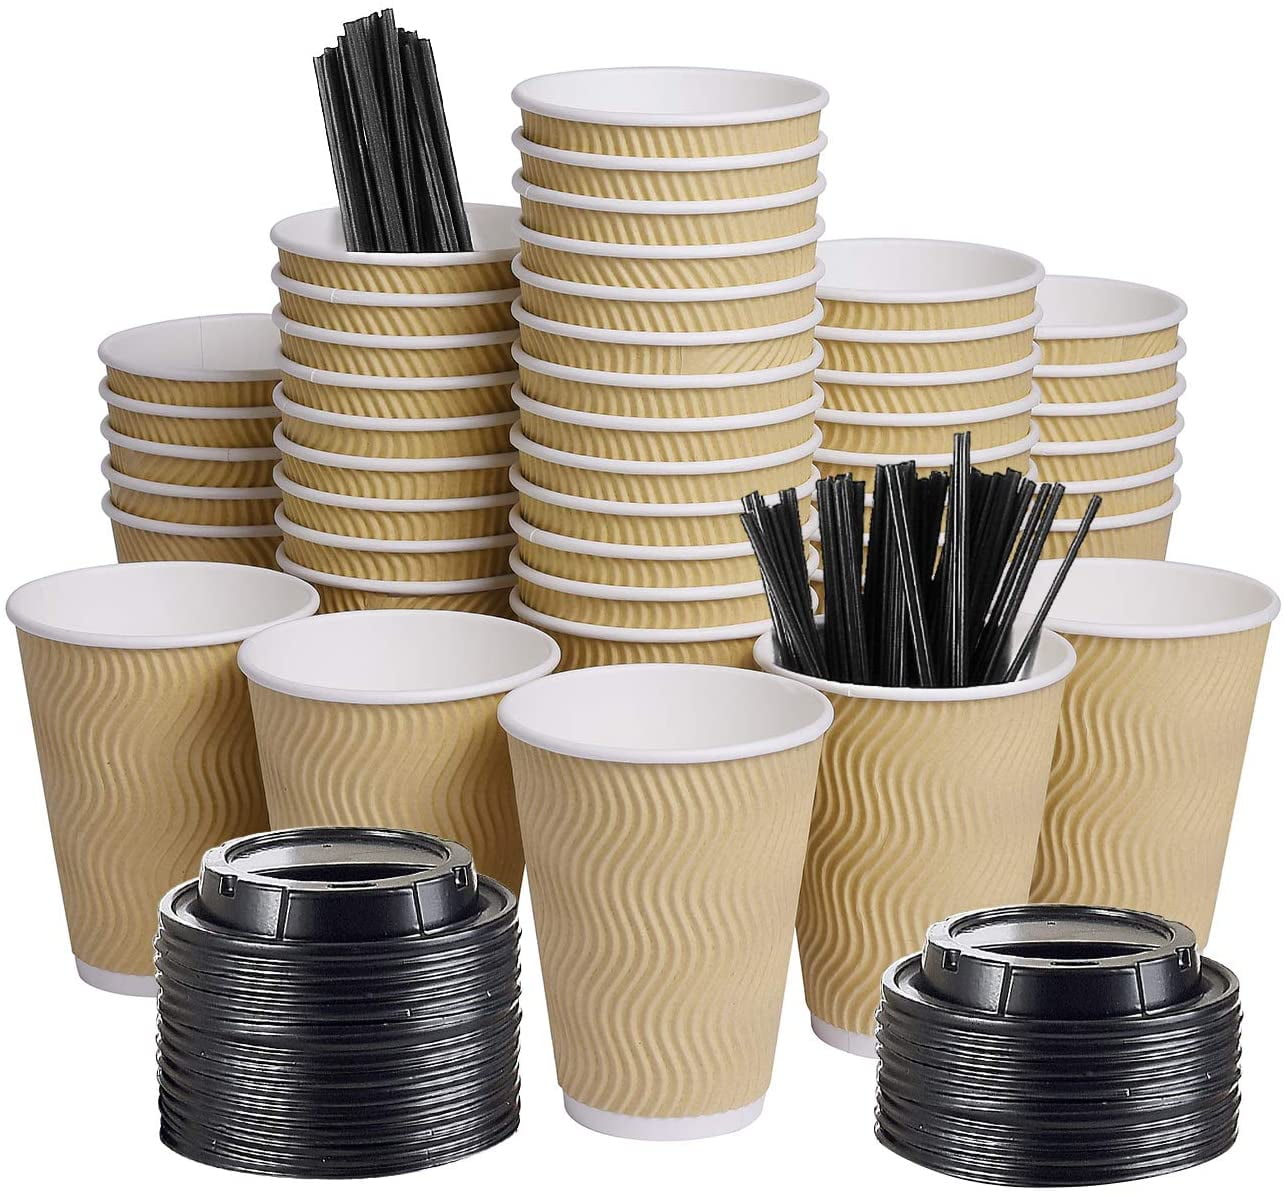 100 8oz DISPOSABLE CUP BROWN PAPER RIPPLE TRIPPLED WALL CUPS COFFEE TEA NO LIDS